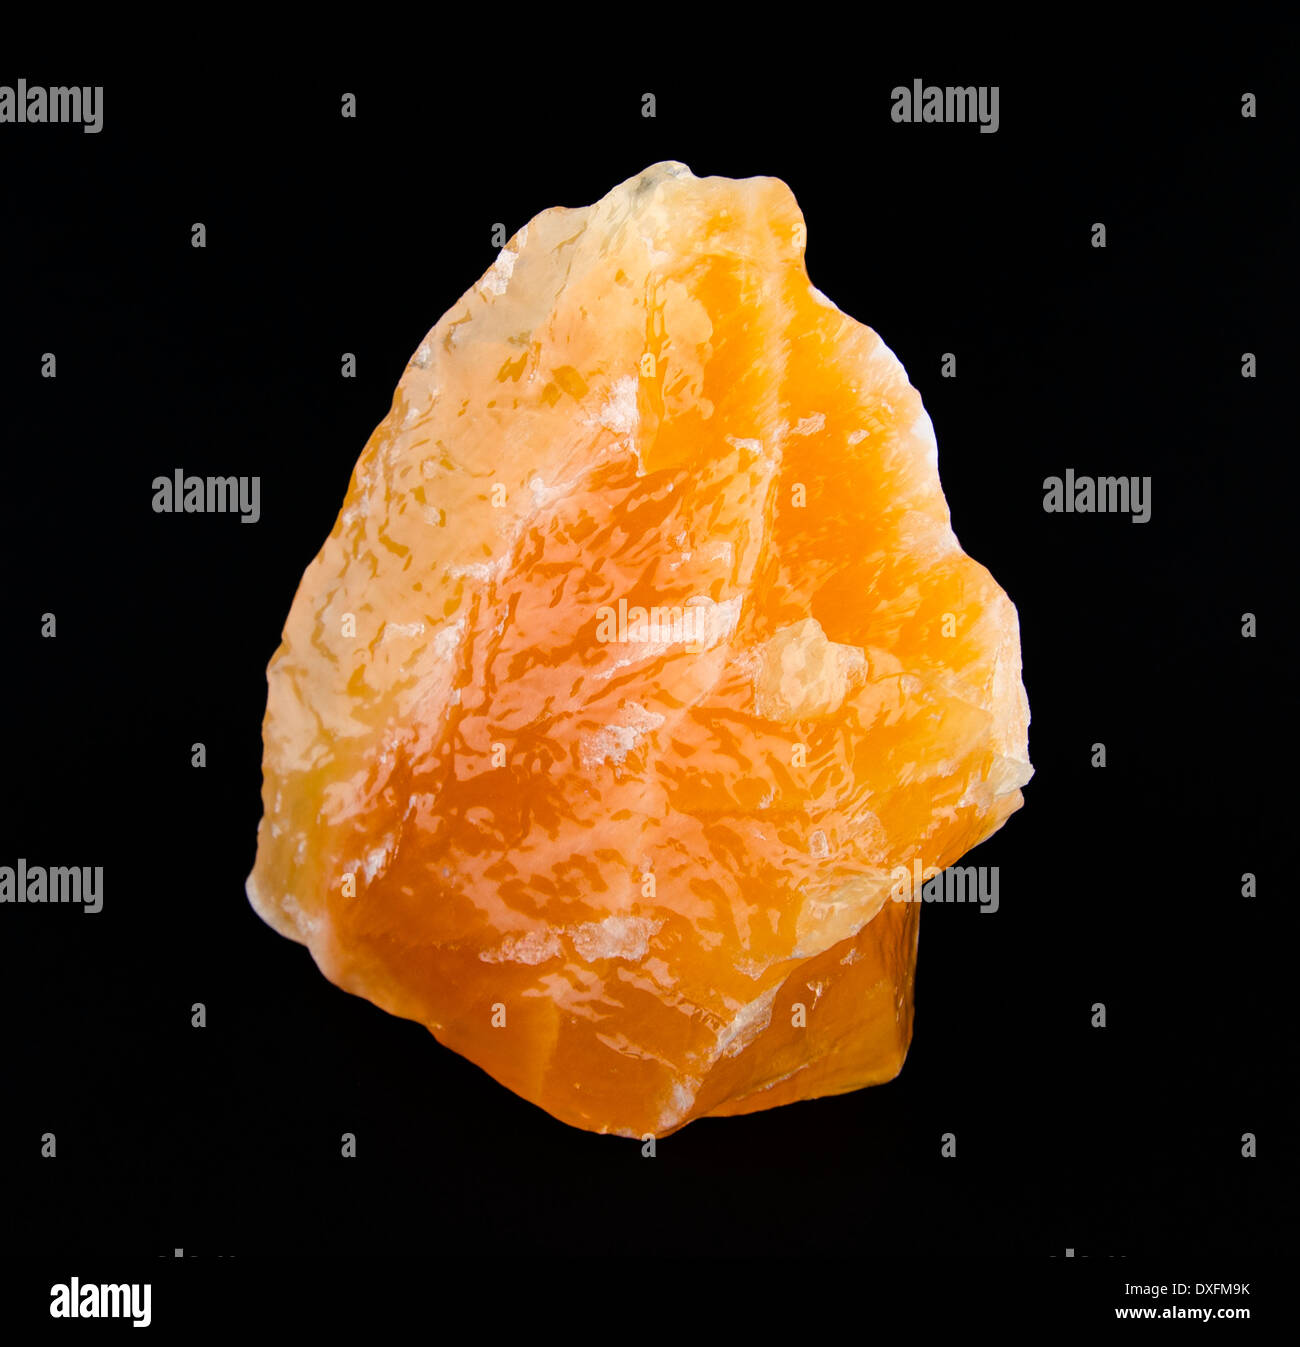 Yellow and orange calcite, found in Mexico on black background - a carbonate mineral and polymorph of calcium carbonate, CaCO3. Stock Photo